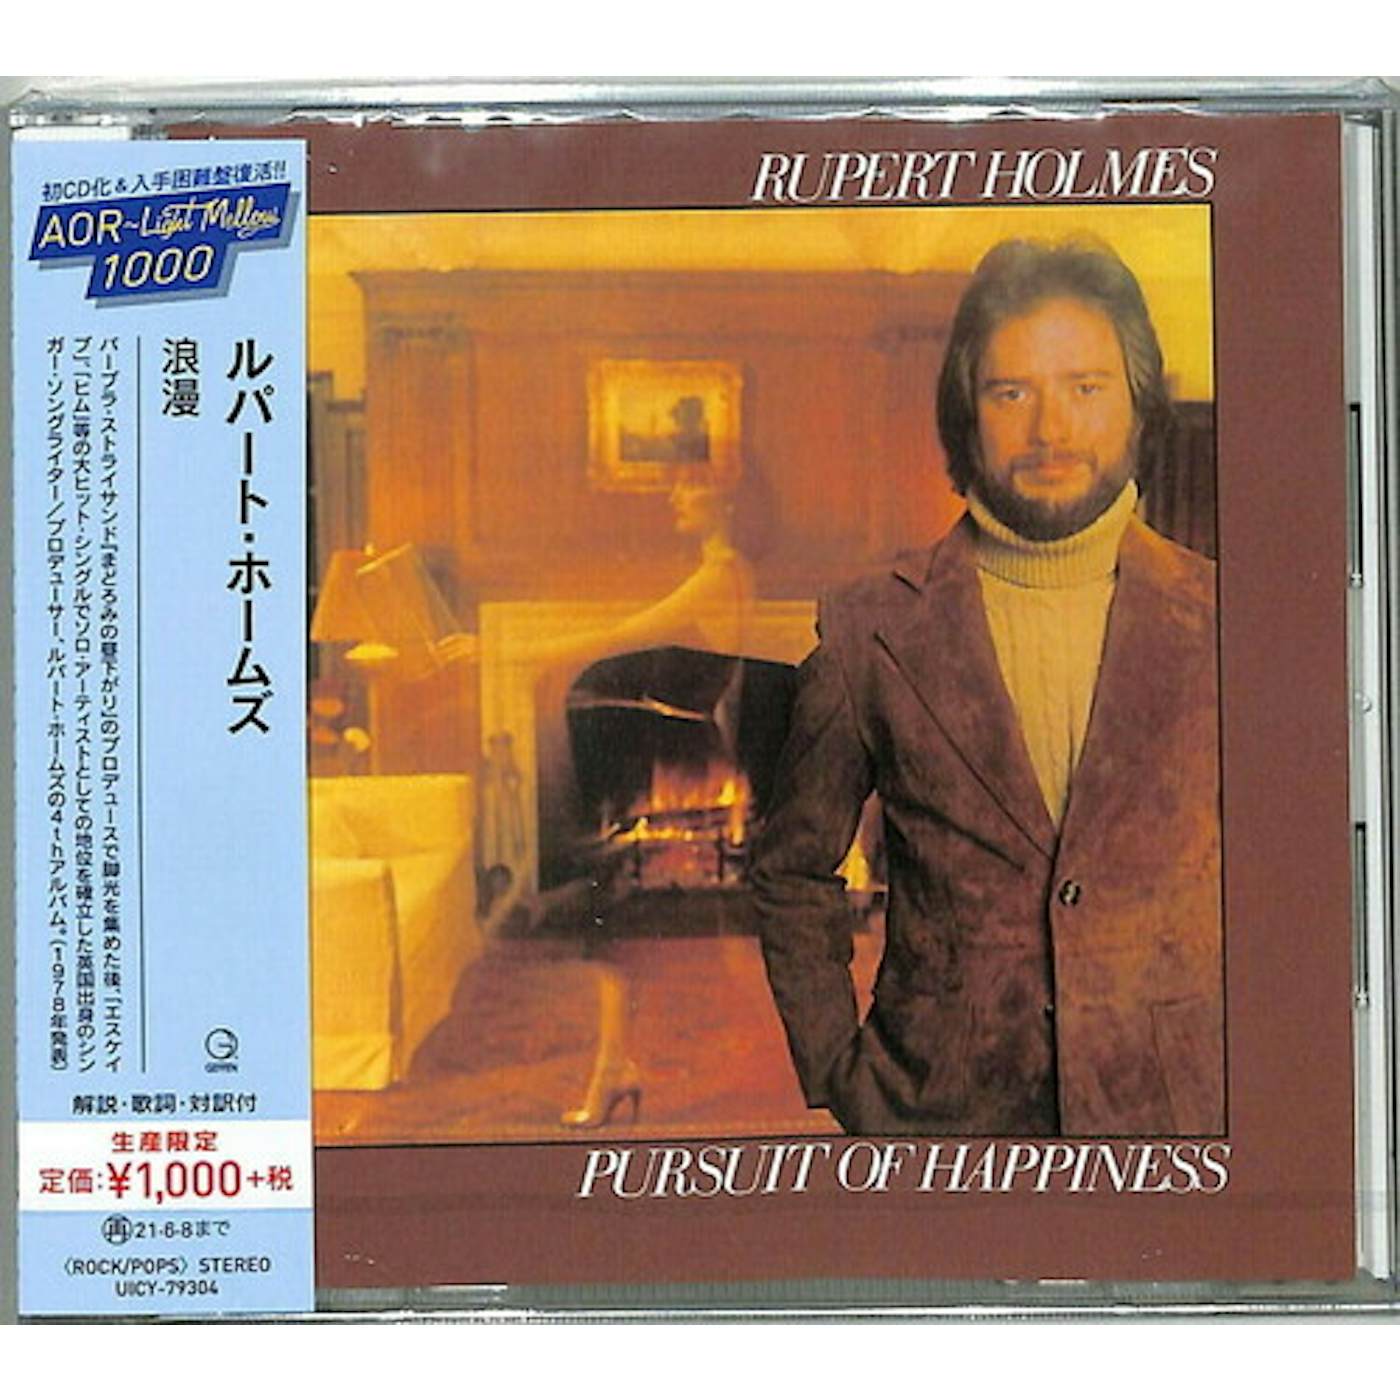 Rupert Holmes PURSUITE OF HAPPINESS CD